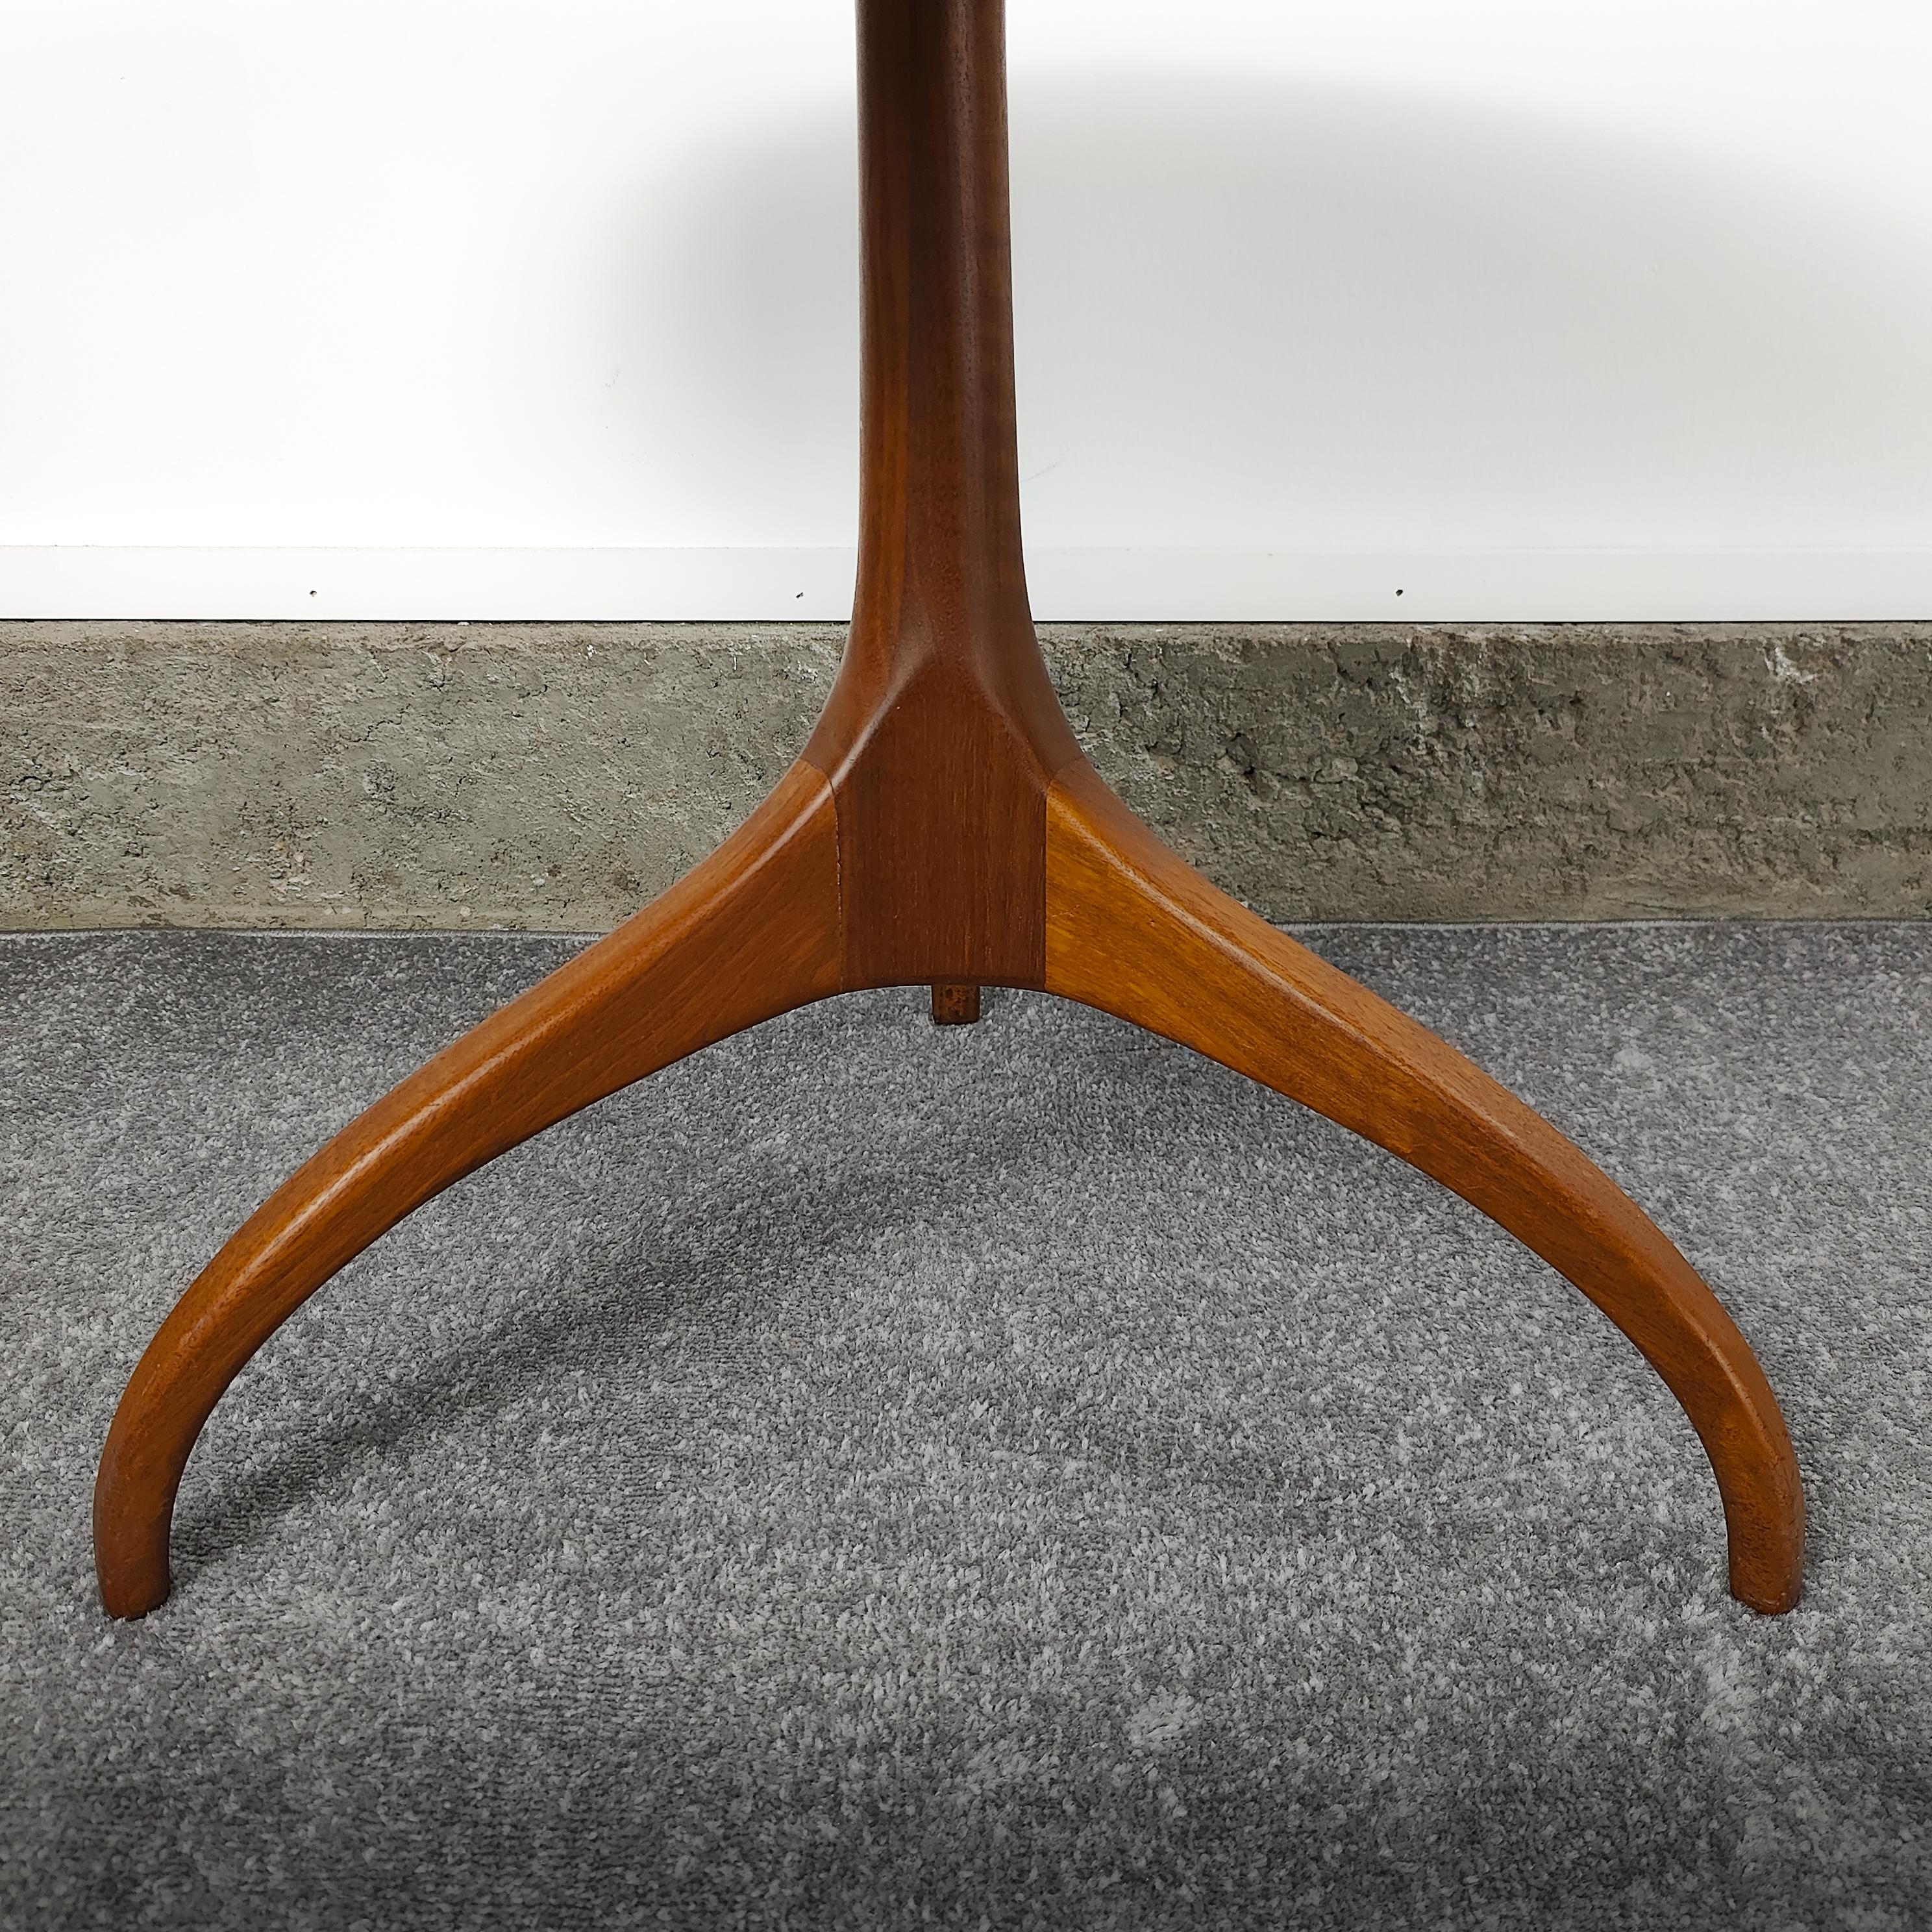 Now available is a great looking sculptural walnut side table by Henredon's Heritage Line. Features a solid walnut base and walut veneered top that has been tested through time. Overall in great shape. Measures approximately 24 inches wide by 21